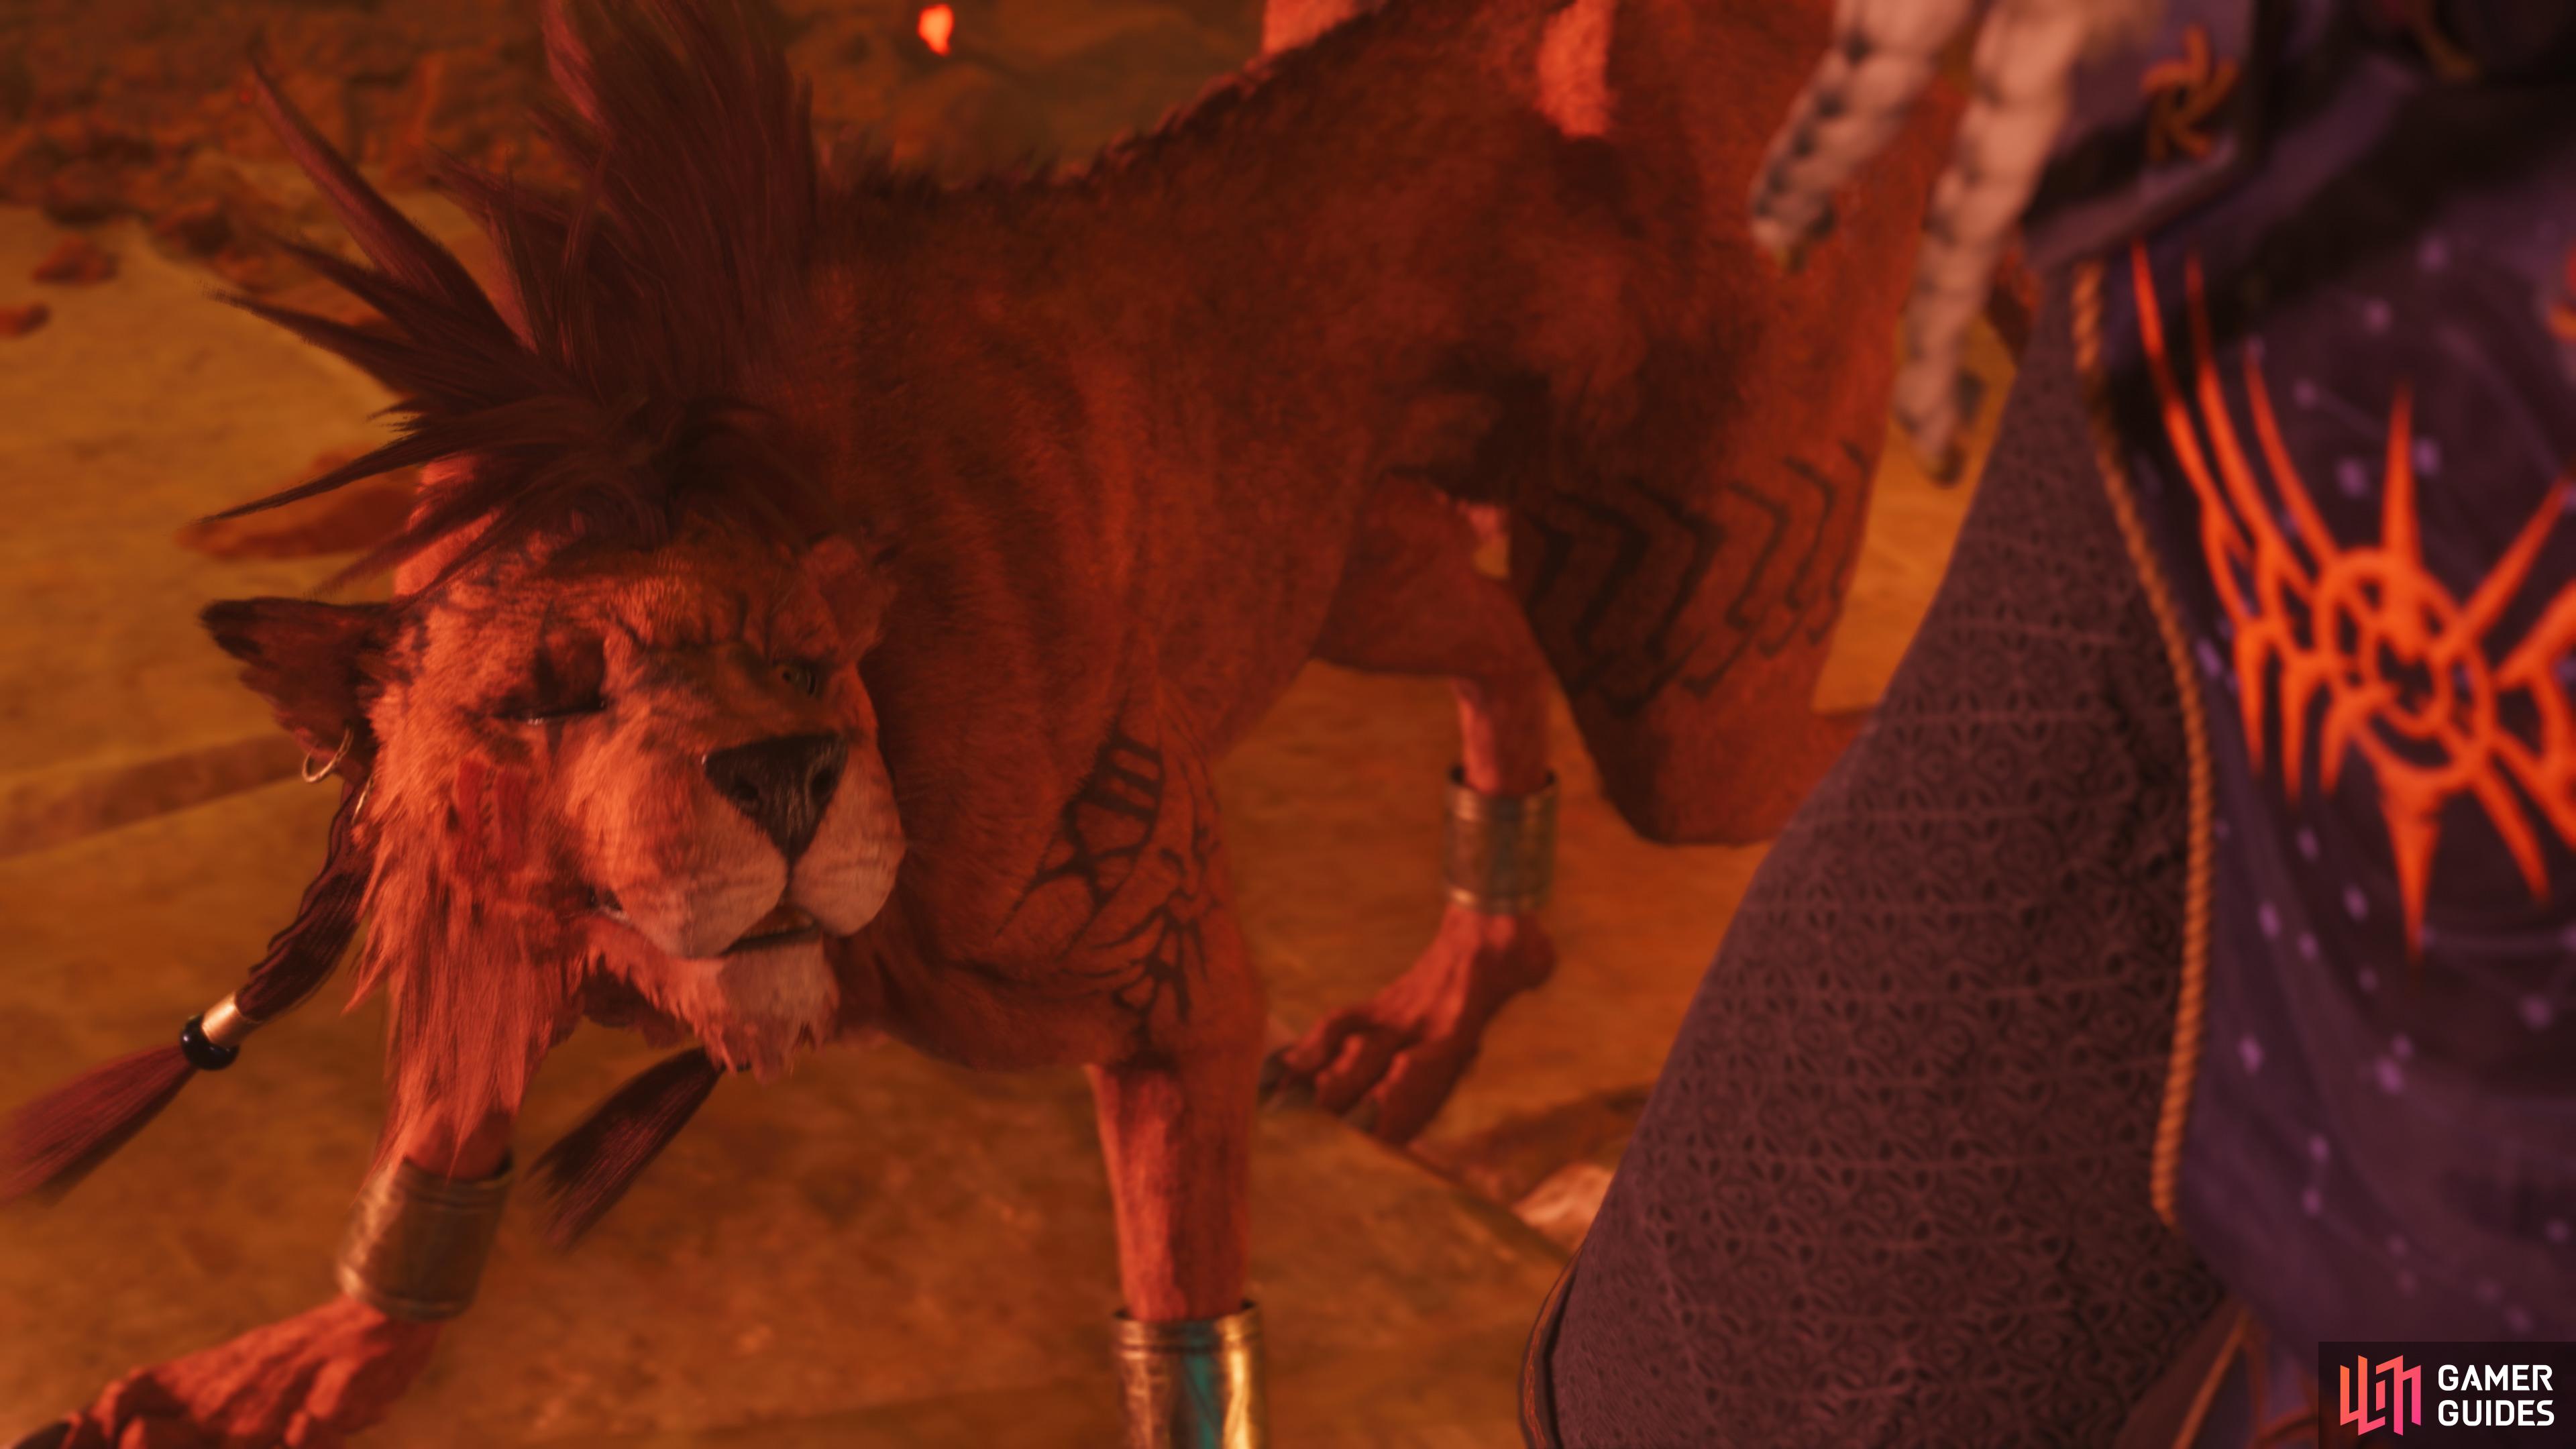 Red XIII joins your party when you reach the Grasslands.